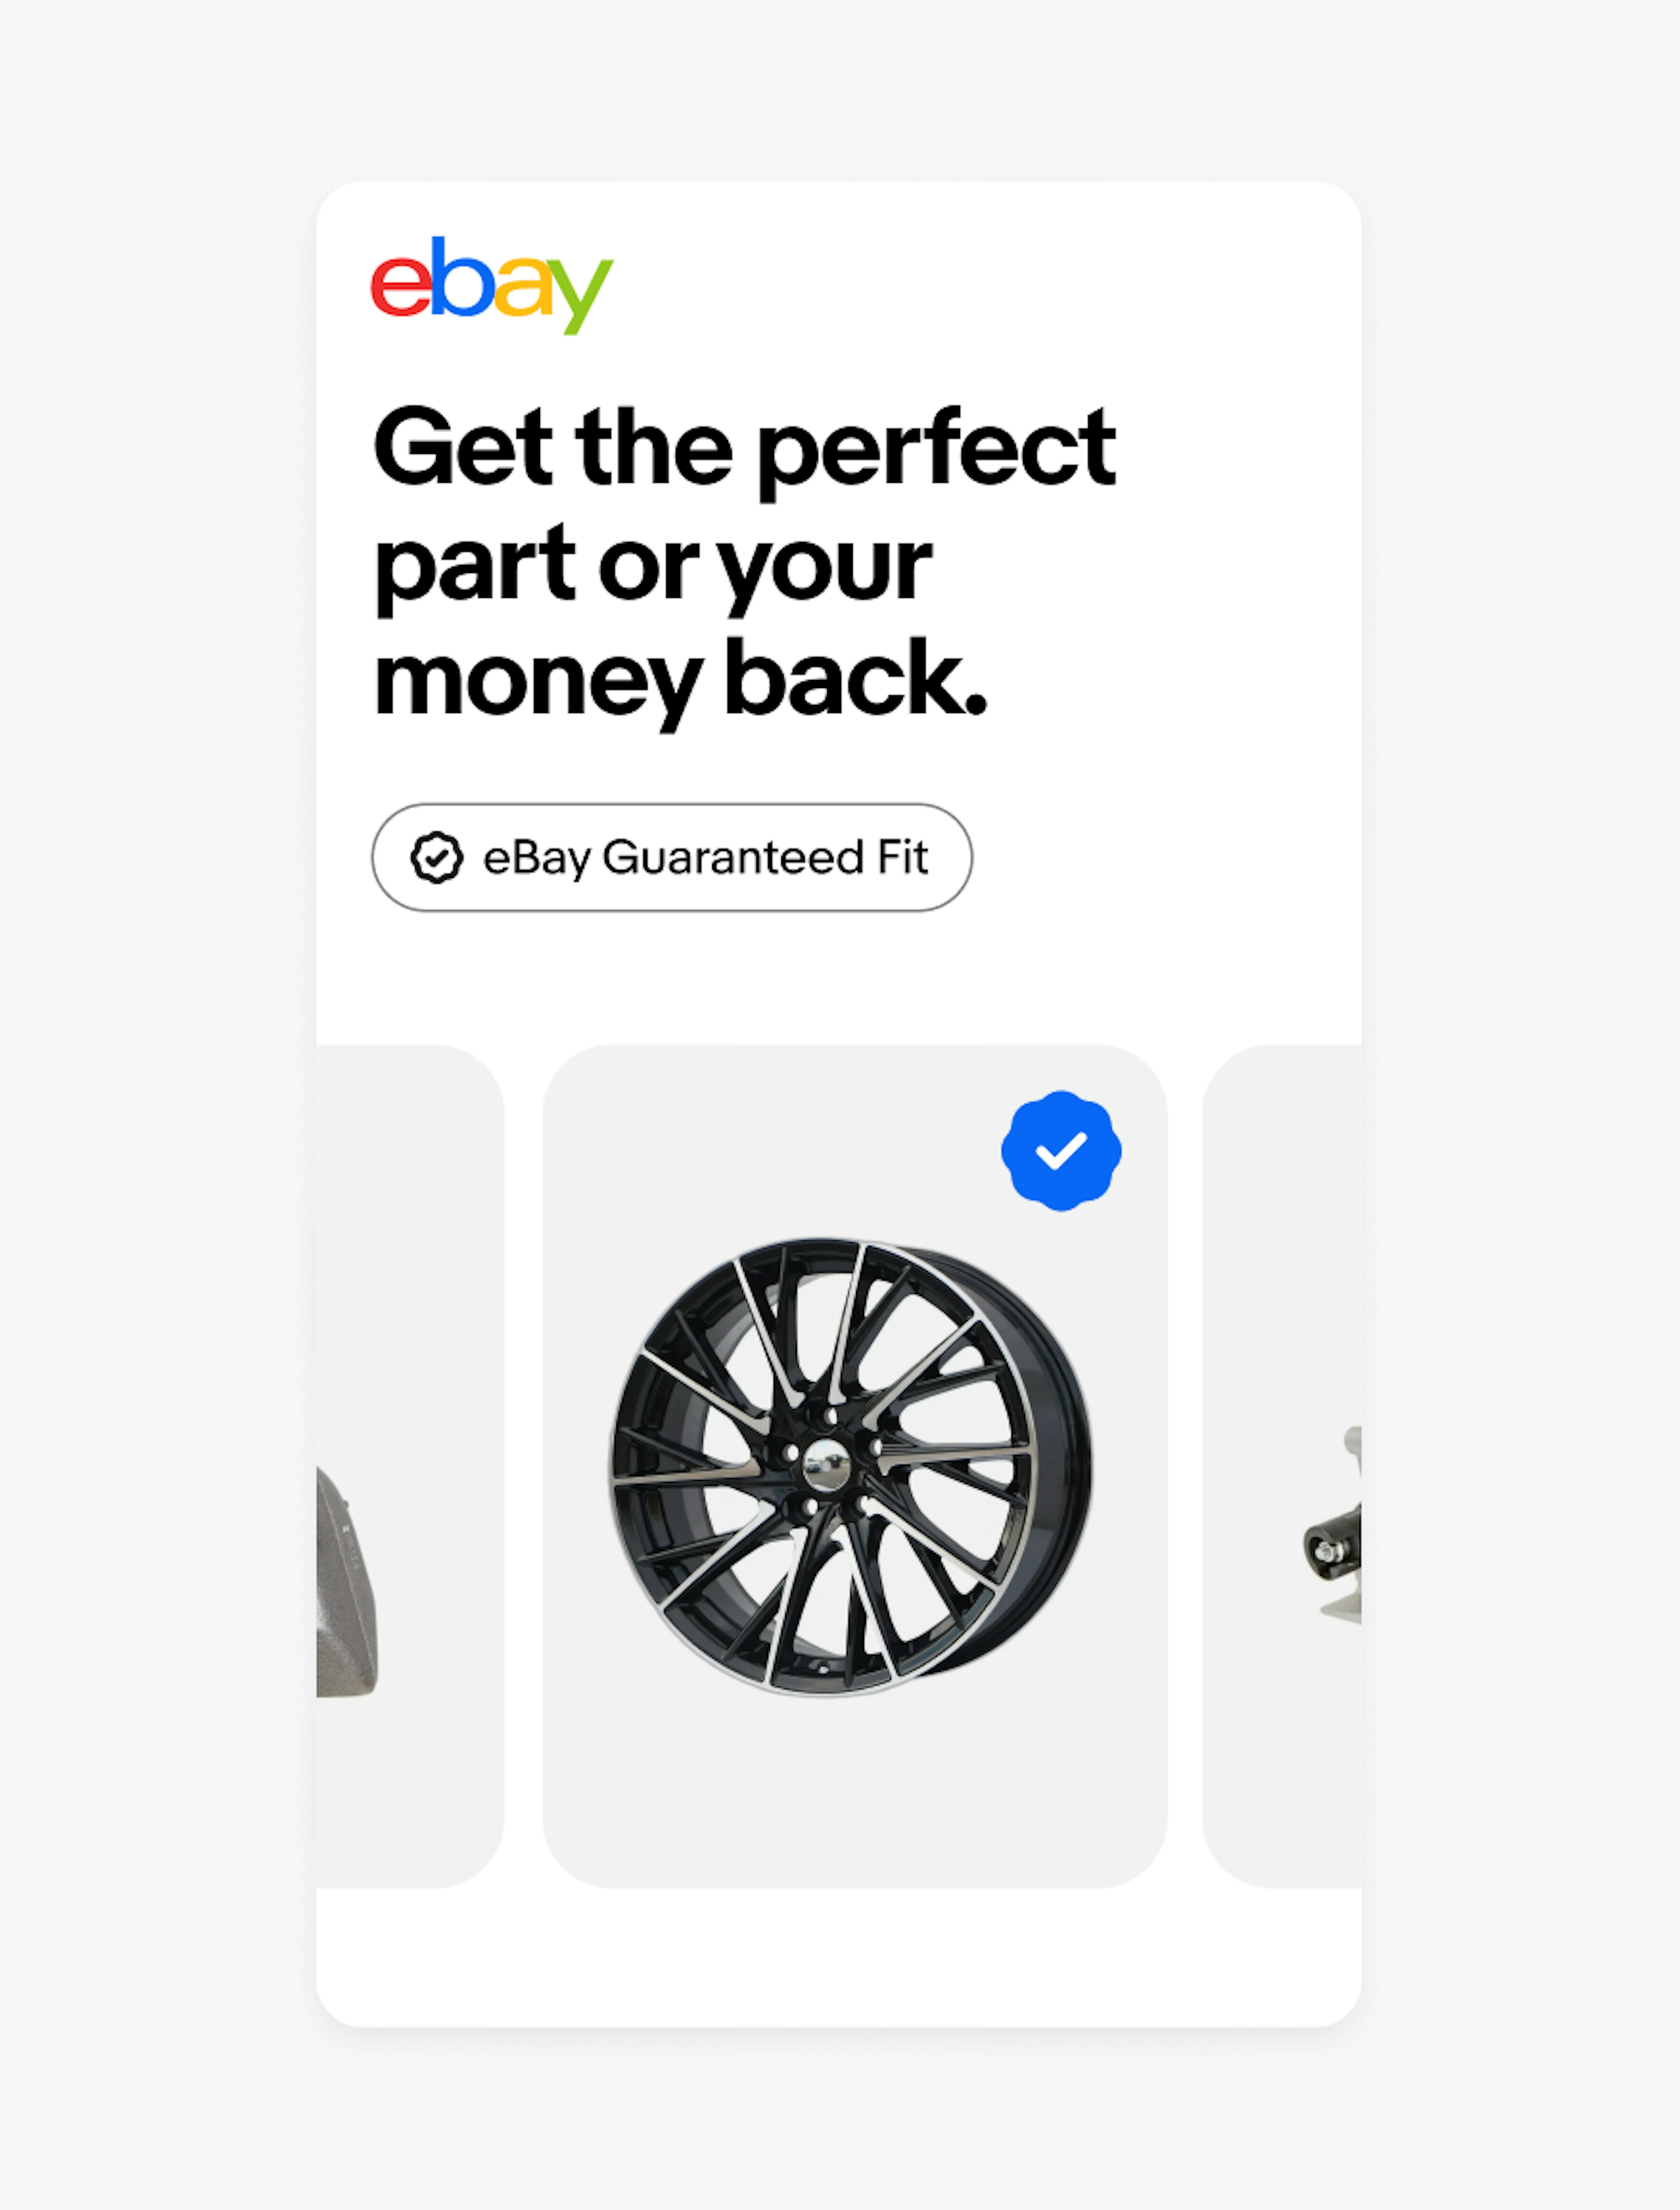 An ad with a filled rosette checkmark icon placed on top of an image of a car rim. An unfilled version of the icon is used in a program badge lockup within a pill shape towards the top.